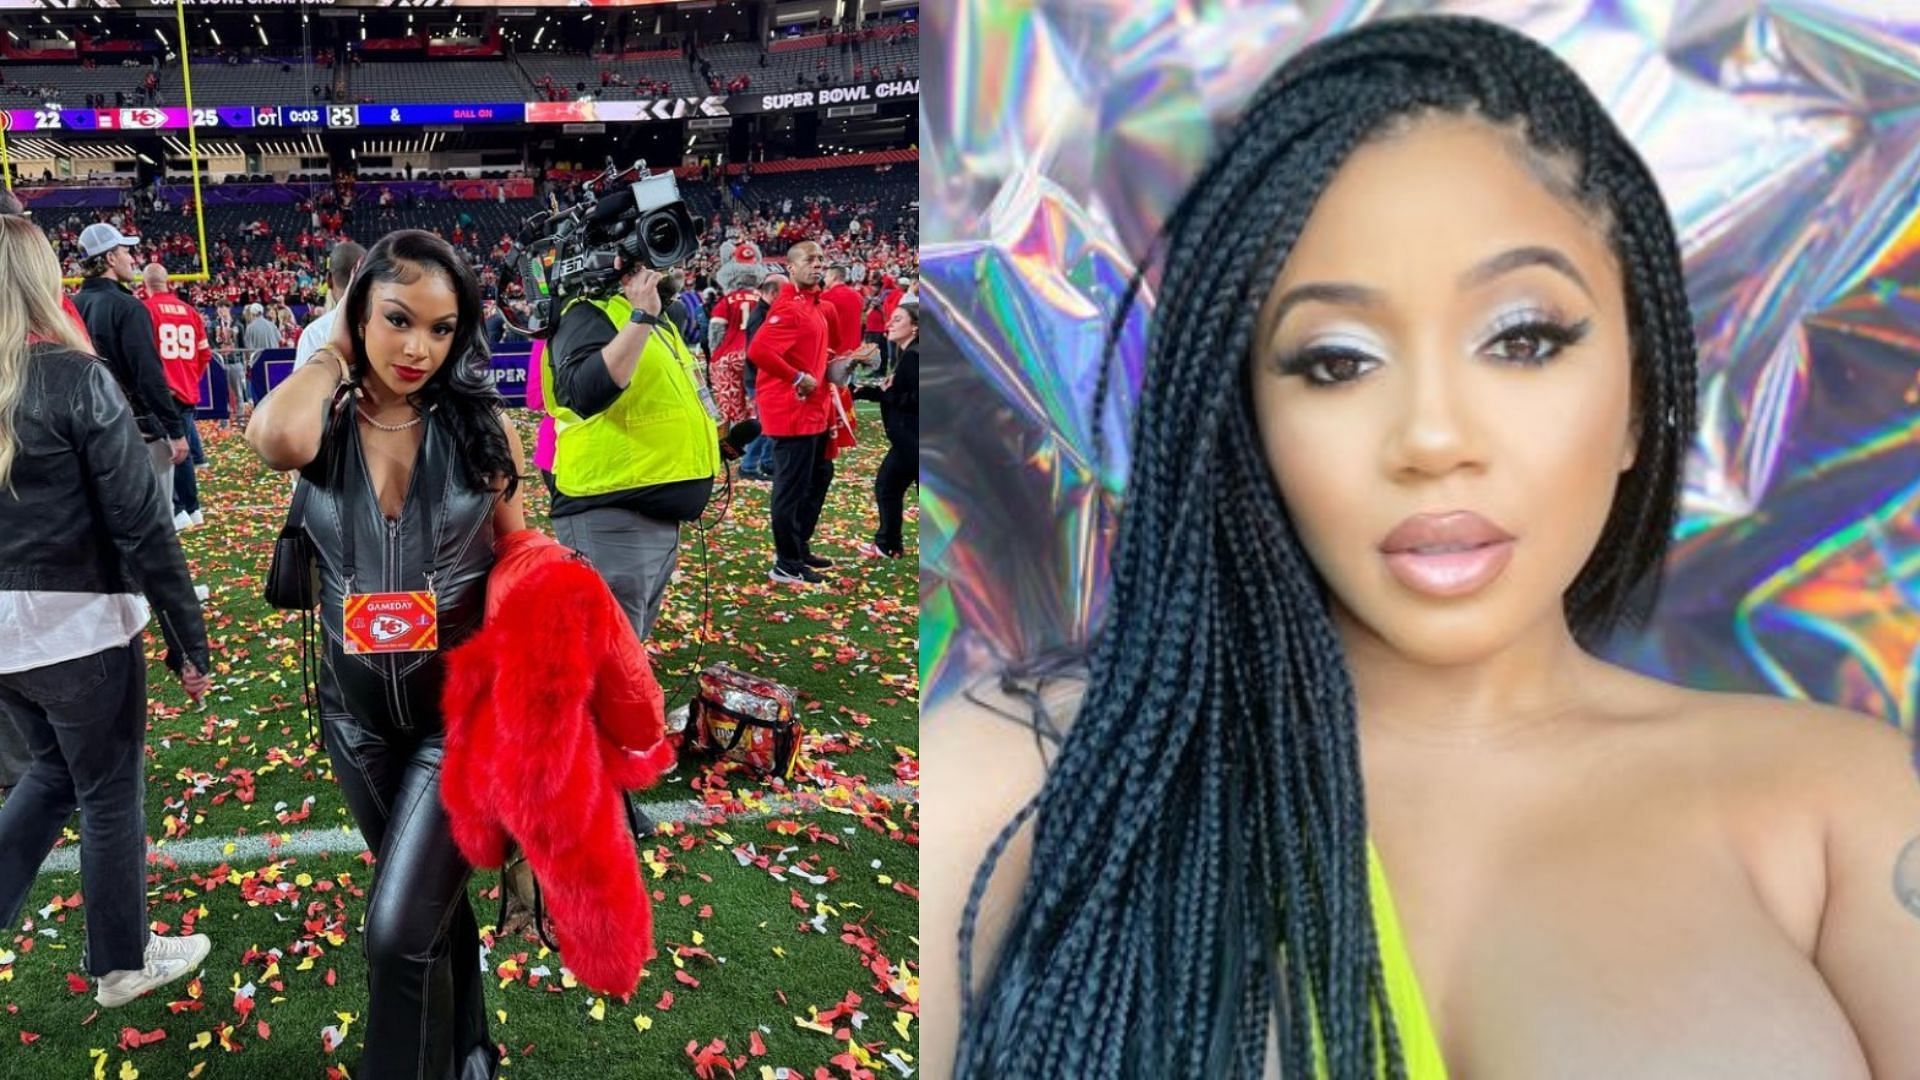 Two NFL WAGs had a disagreement on social media after Super Bowl LVIII.